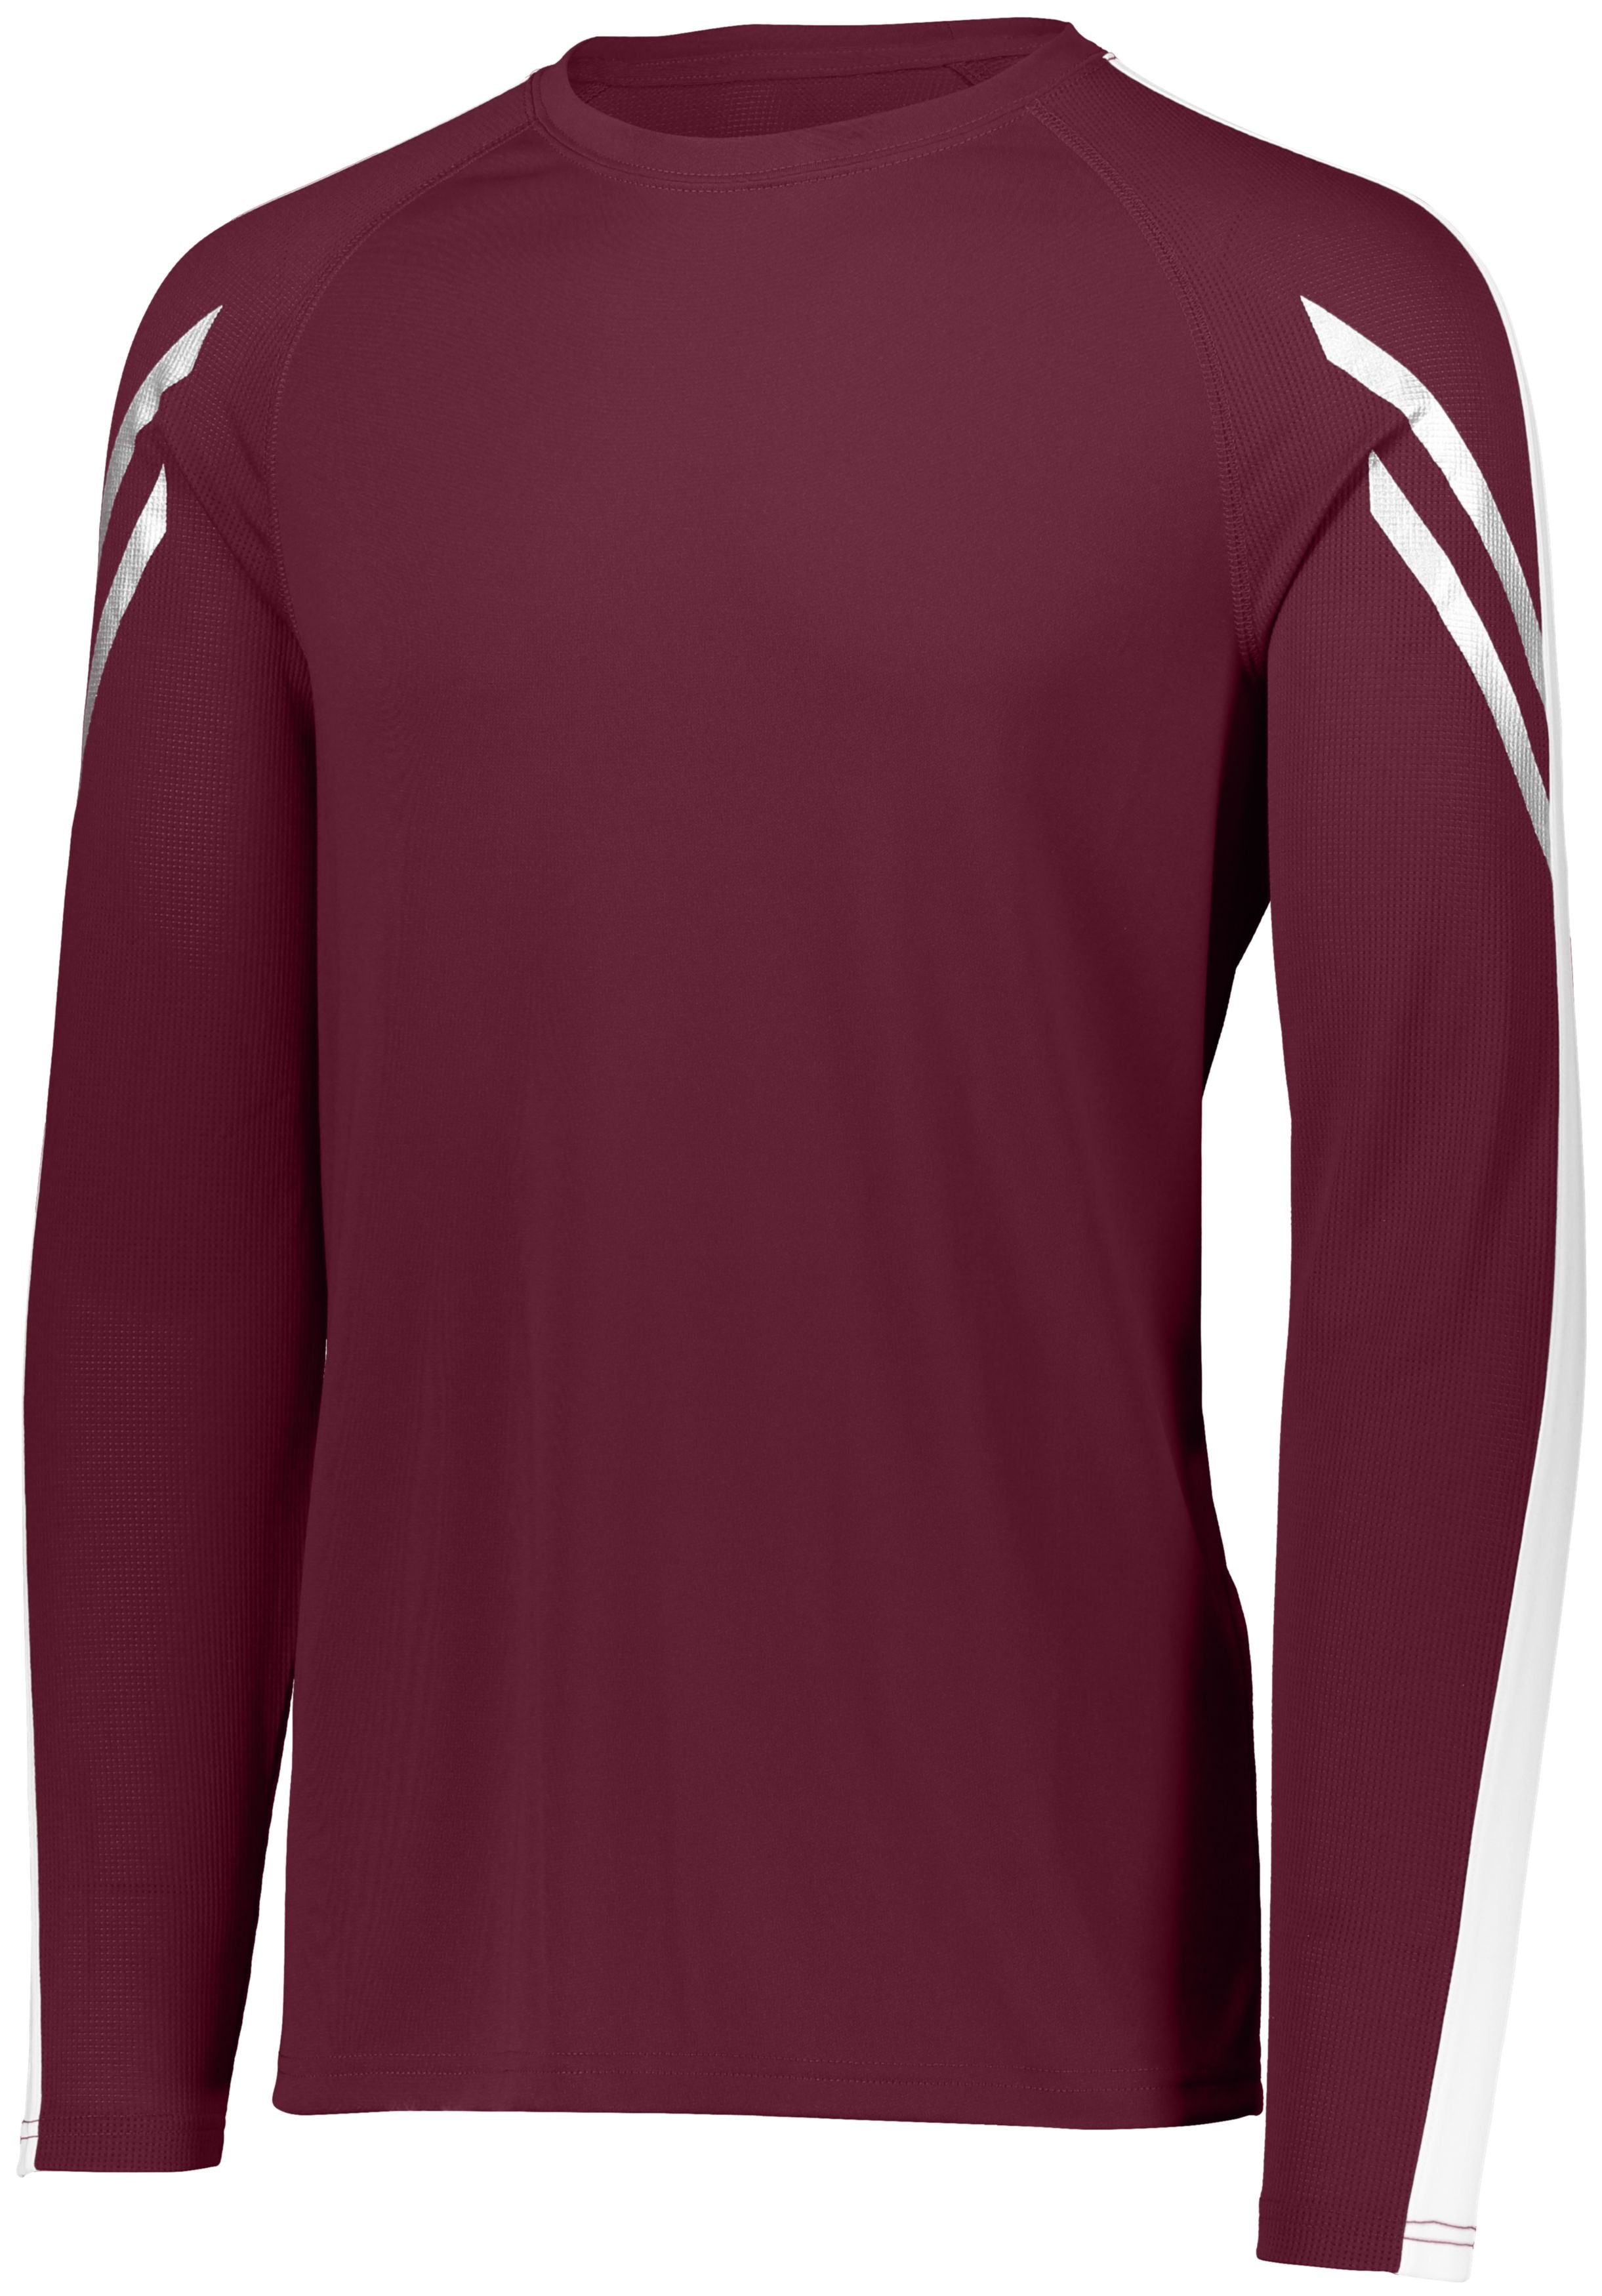 Holloway Flux Shirt Long Sleeve in Maroon/White  -Part of the Adult, Holloway, Shirts, Flux-Collection product lines at KanaleyCreations.com